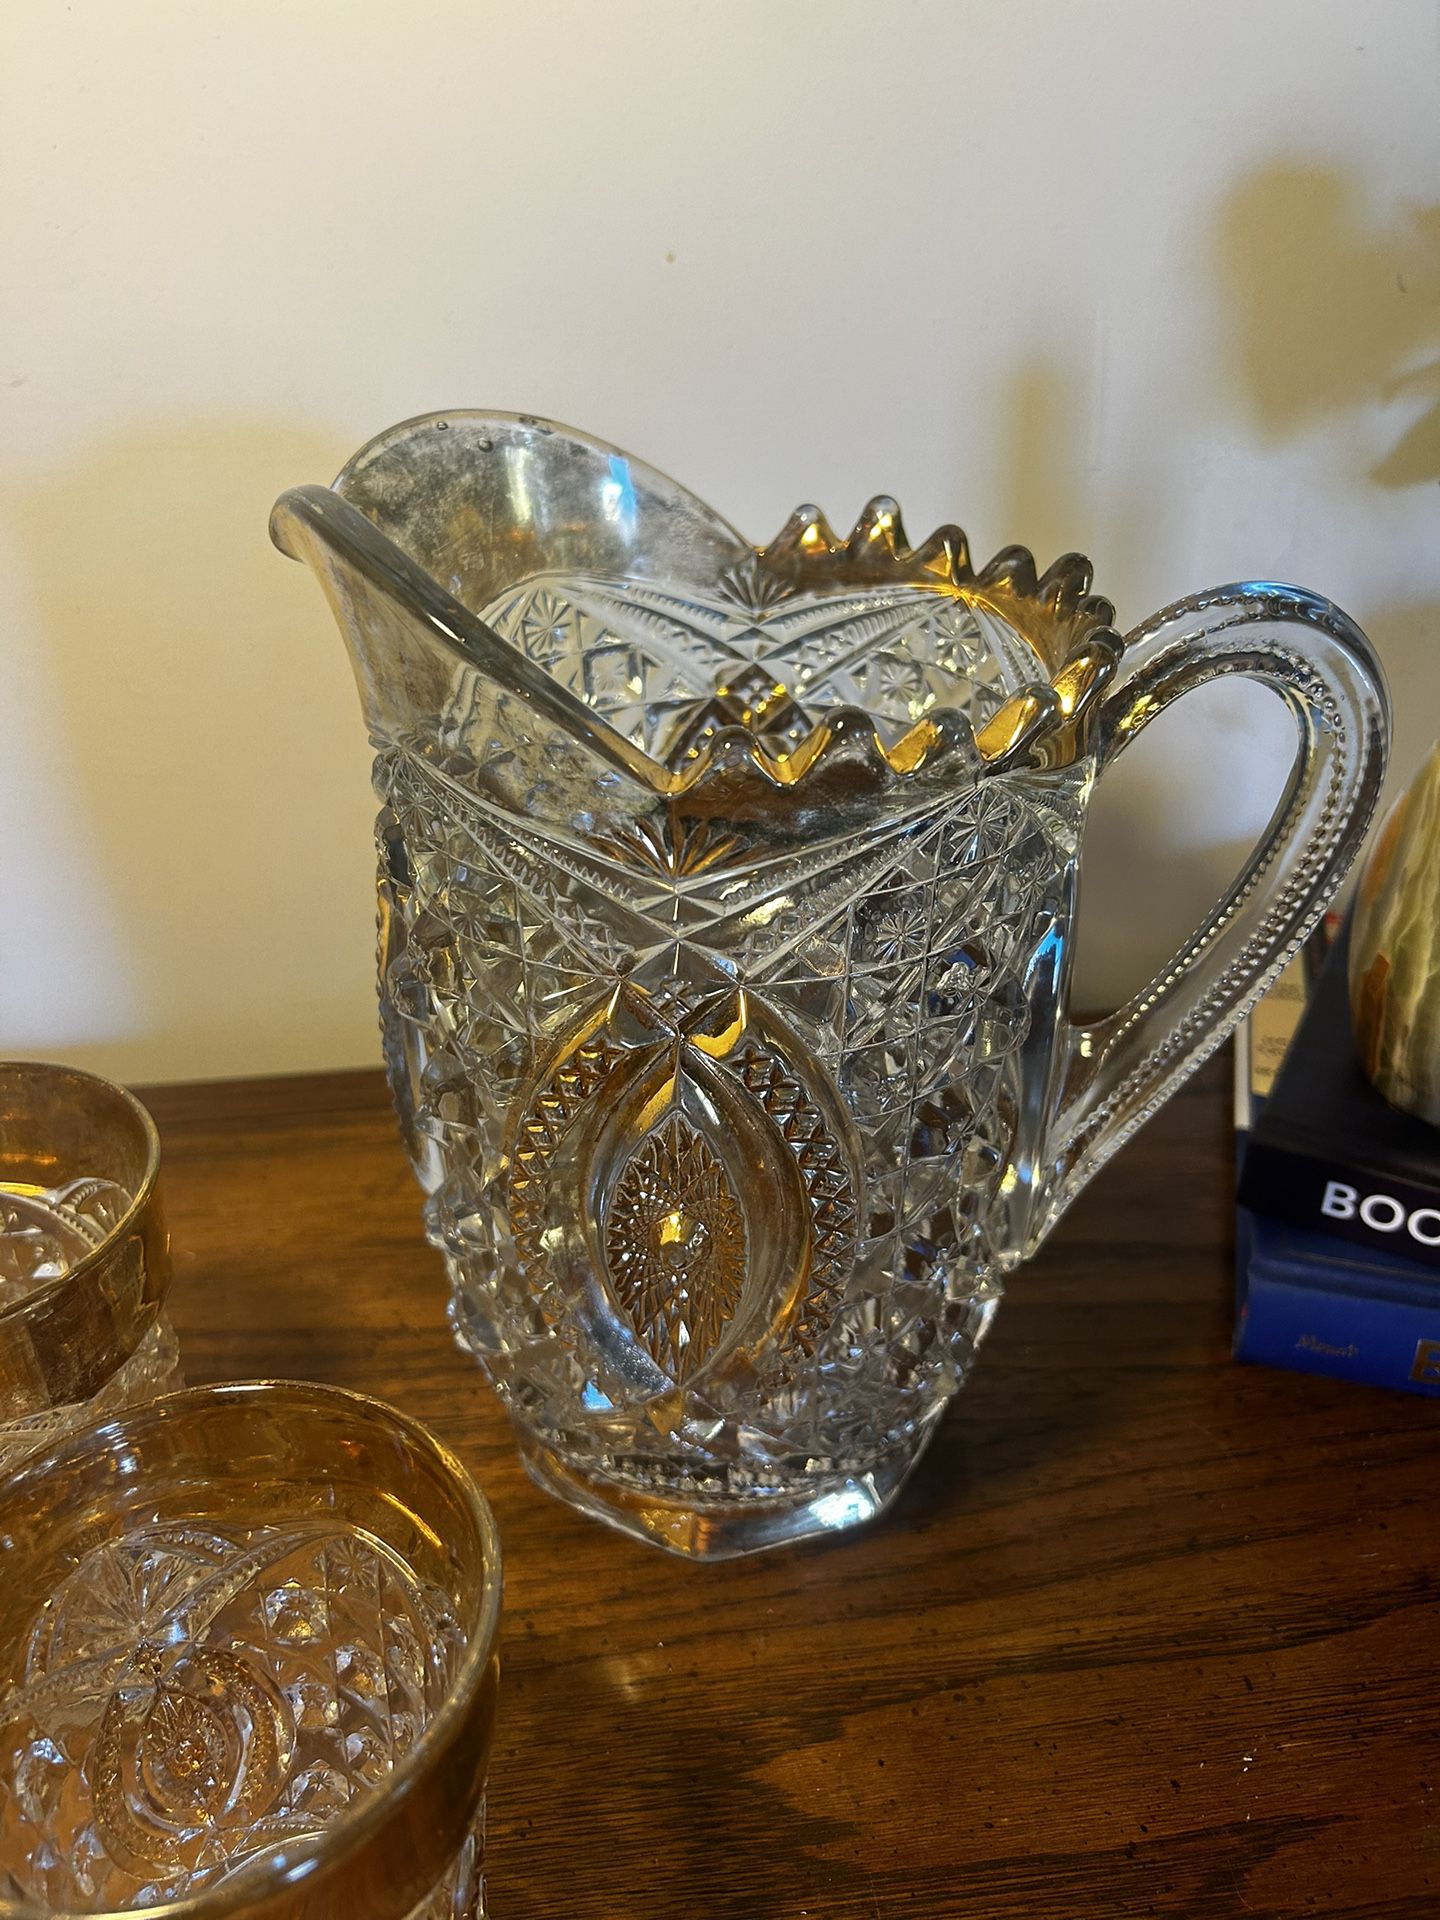 Antique Pressed Glass Pitcher and tumbler set with gold trim